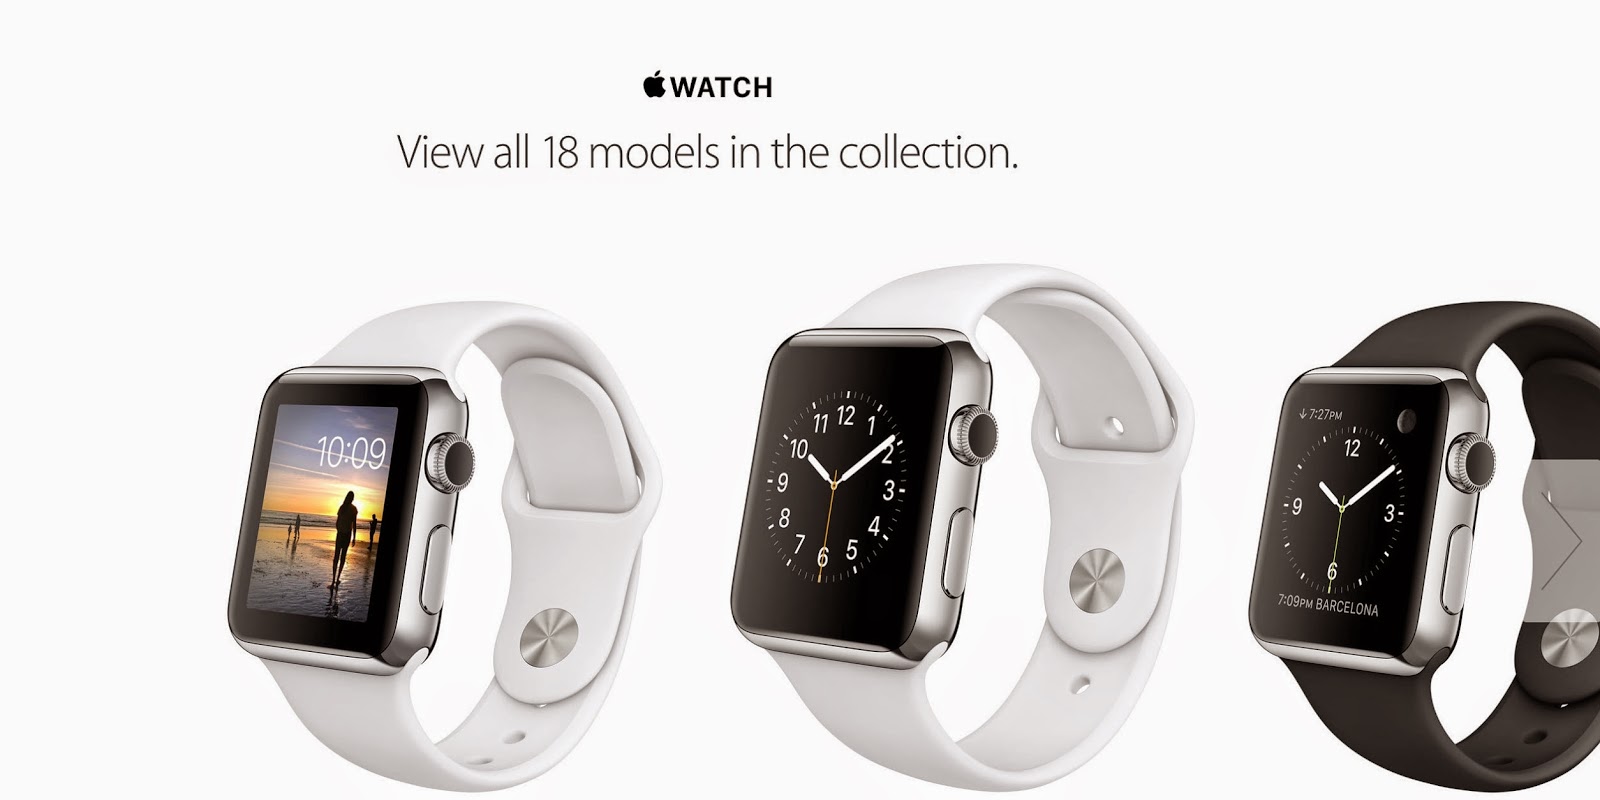 apple announced their apple watch brand of smart watches today and ...